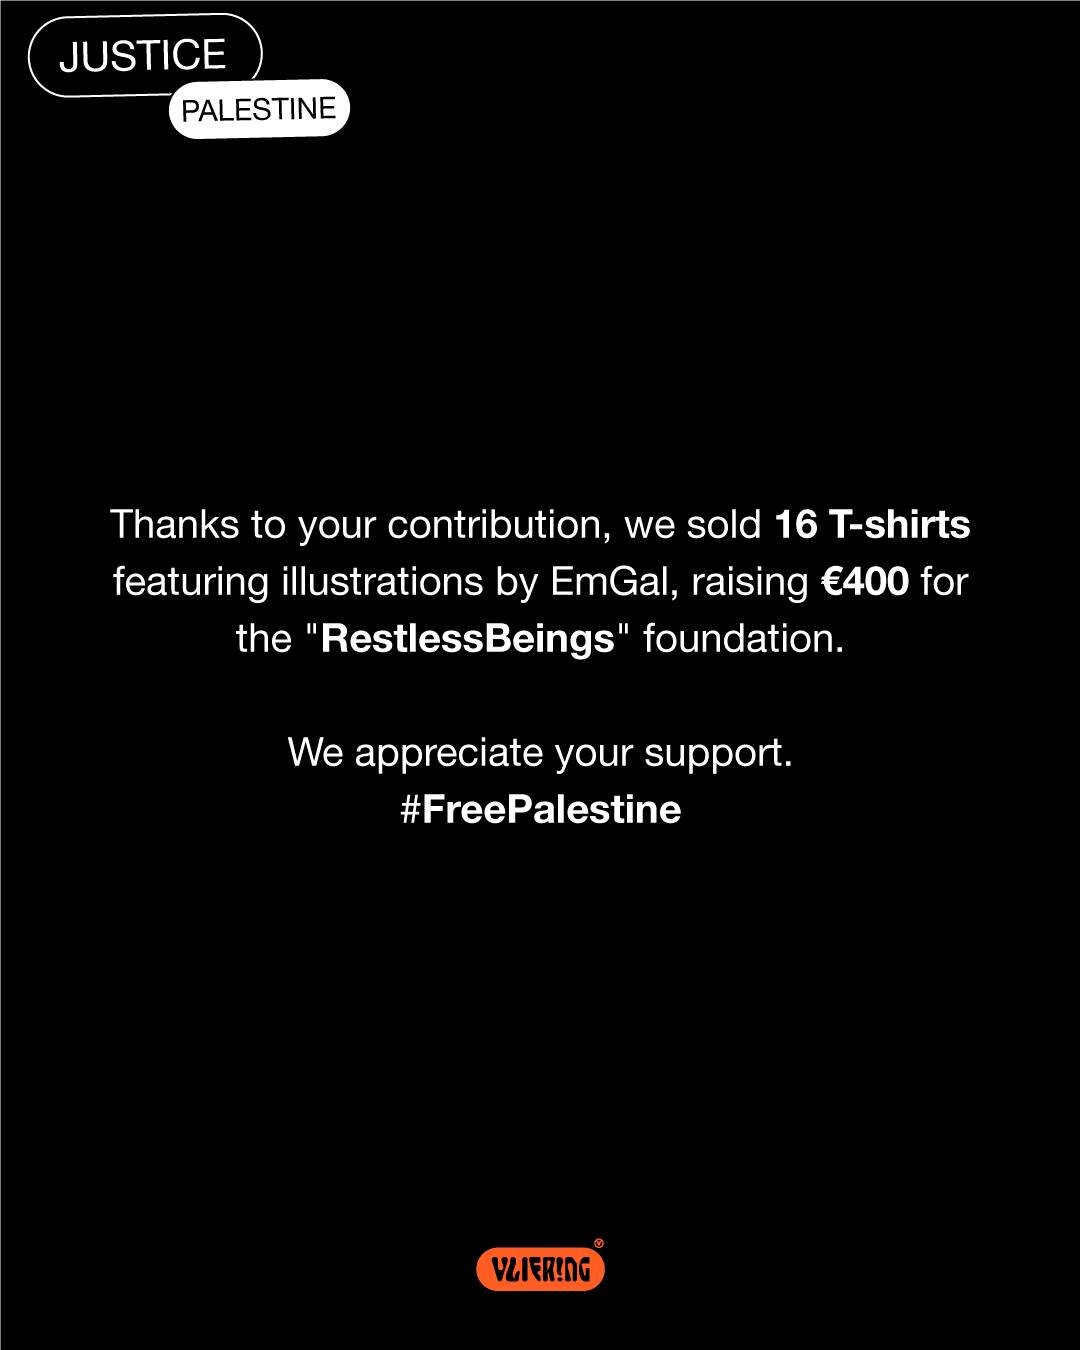 Continue to support Palestine by contributing to charities!
-
#freepalestine